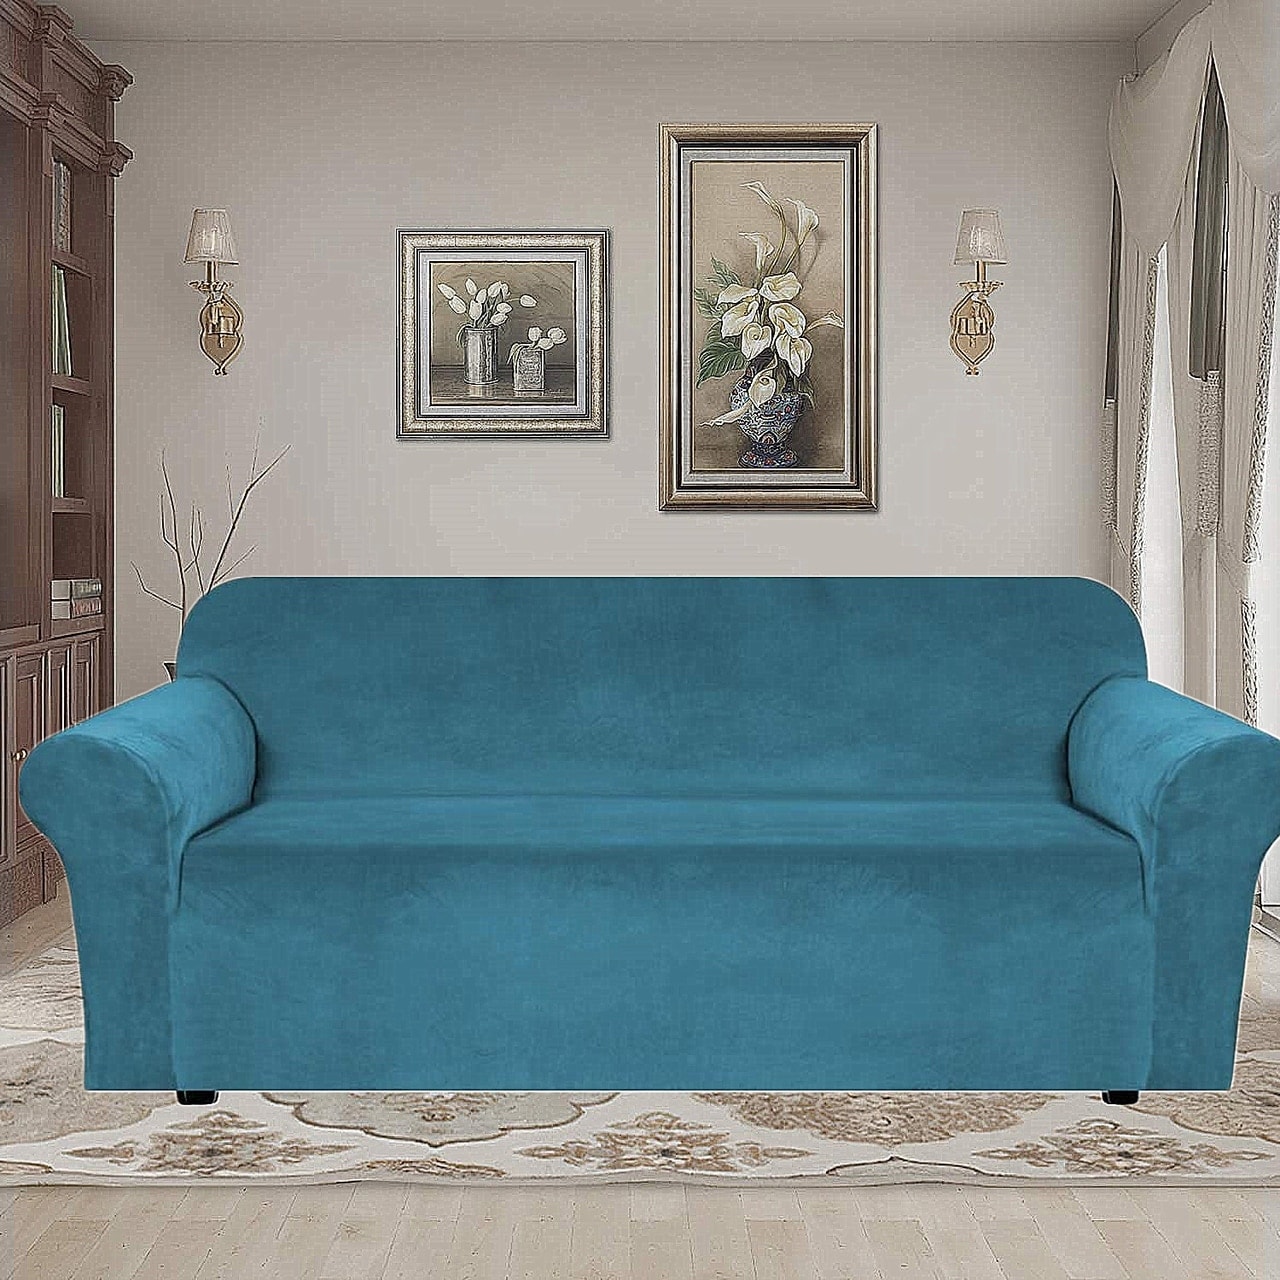 1/2/3 Seat Sofa Slipcover Soft Stretch Couch Cover Protector Easy Fit Washable H 